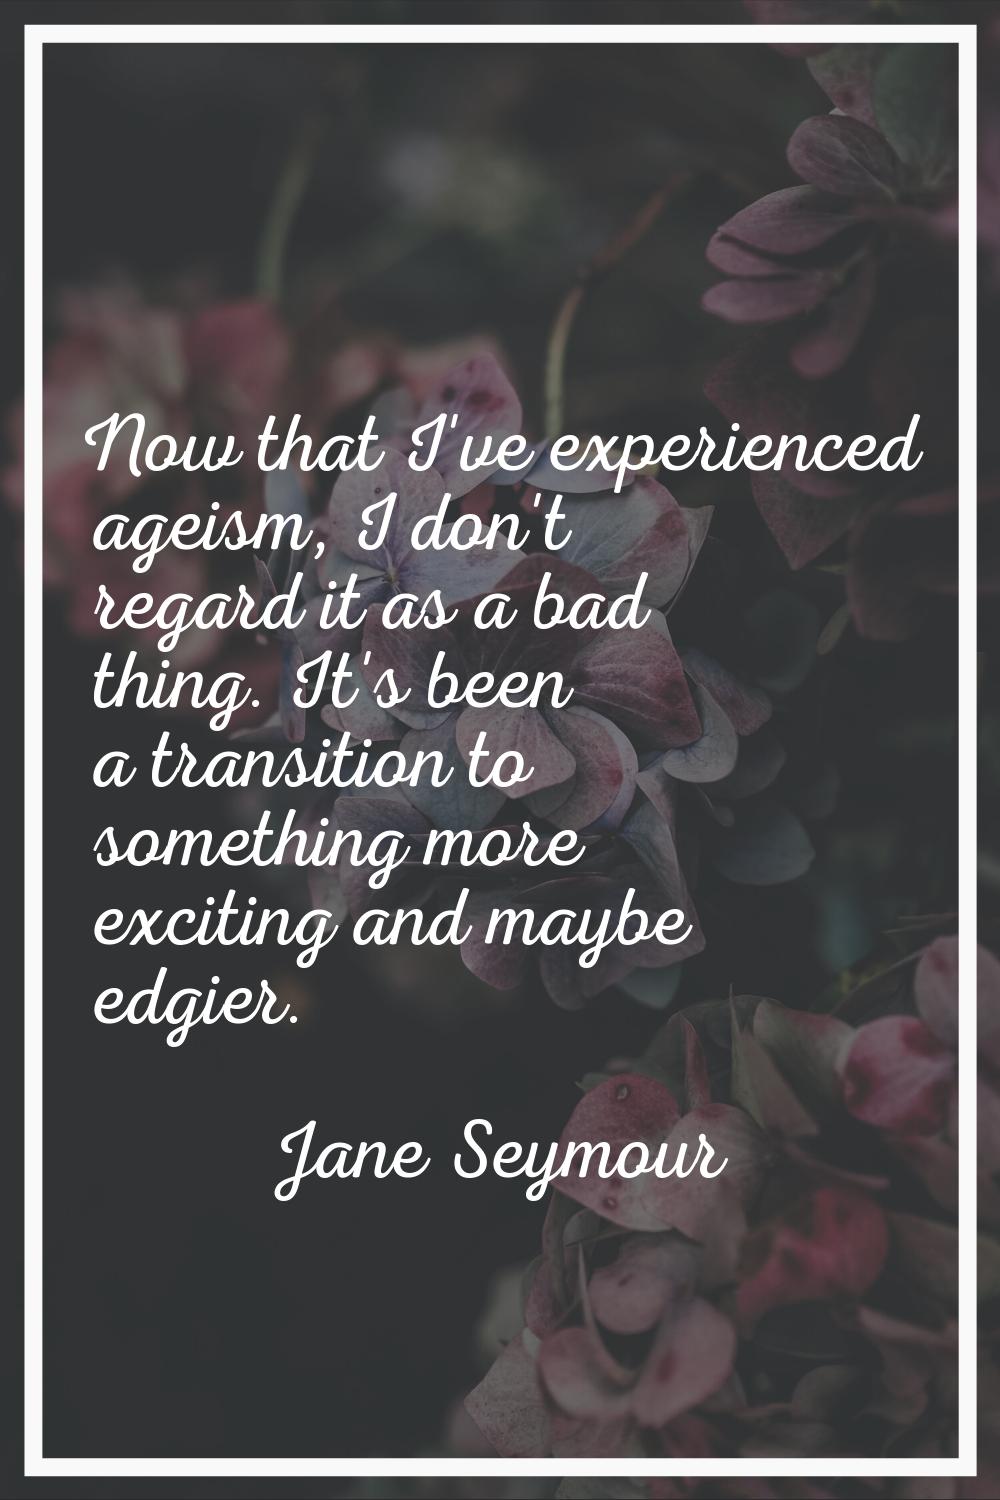 Now that I've experienced ageism, I don't regard it as a bad thing. It's been a transition to somet